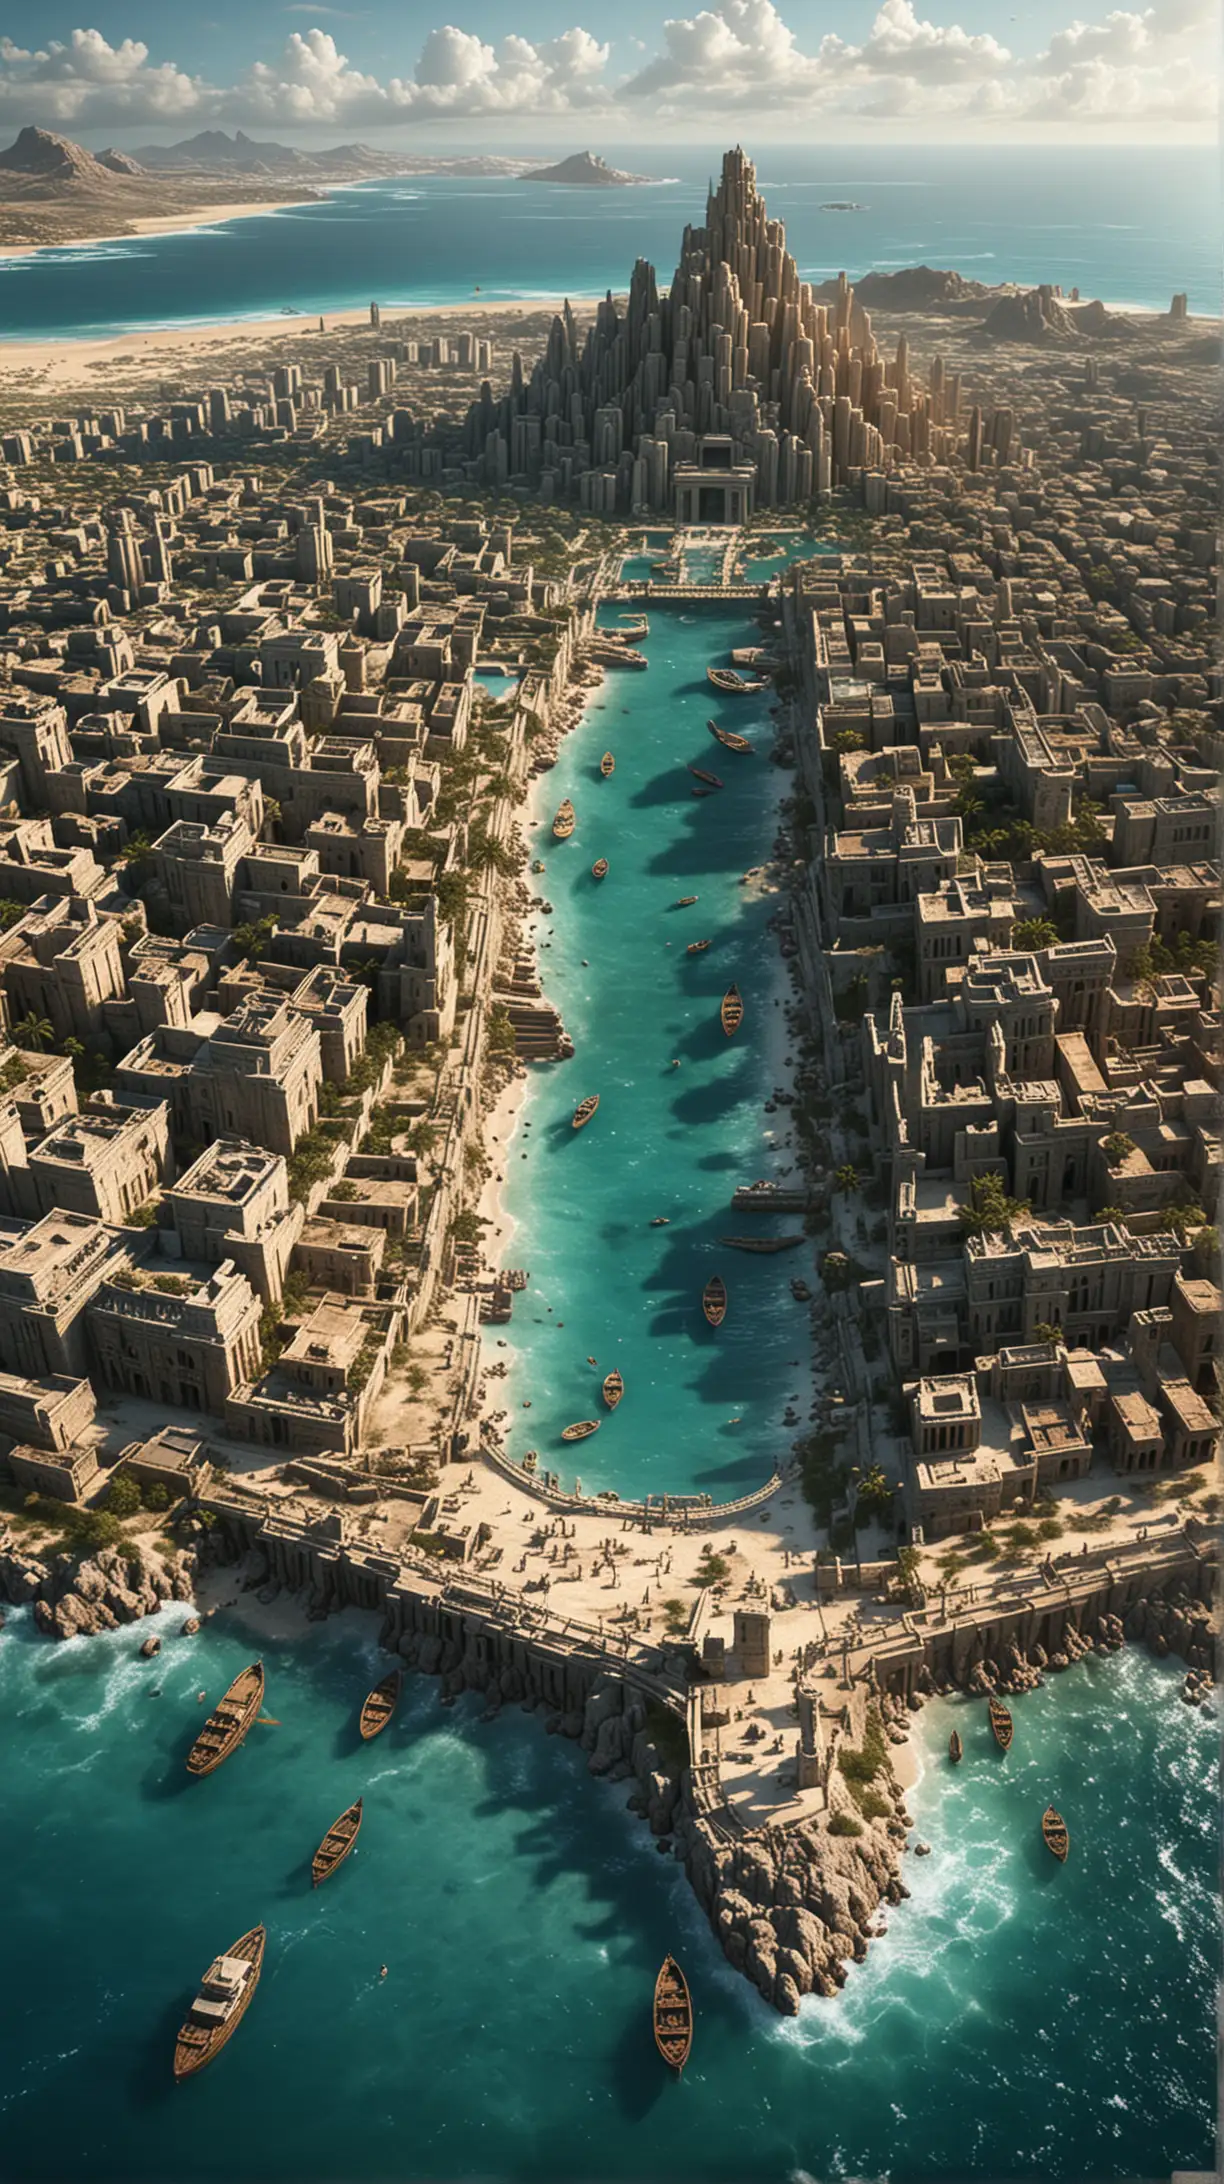 HyperRealistic Depiction of Ancient Atlantis CityState A Cinematic Photo Realism